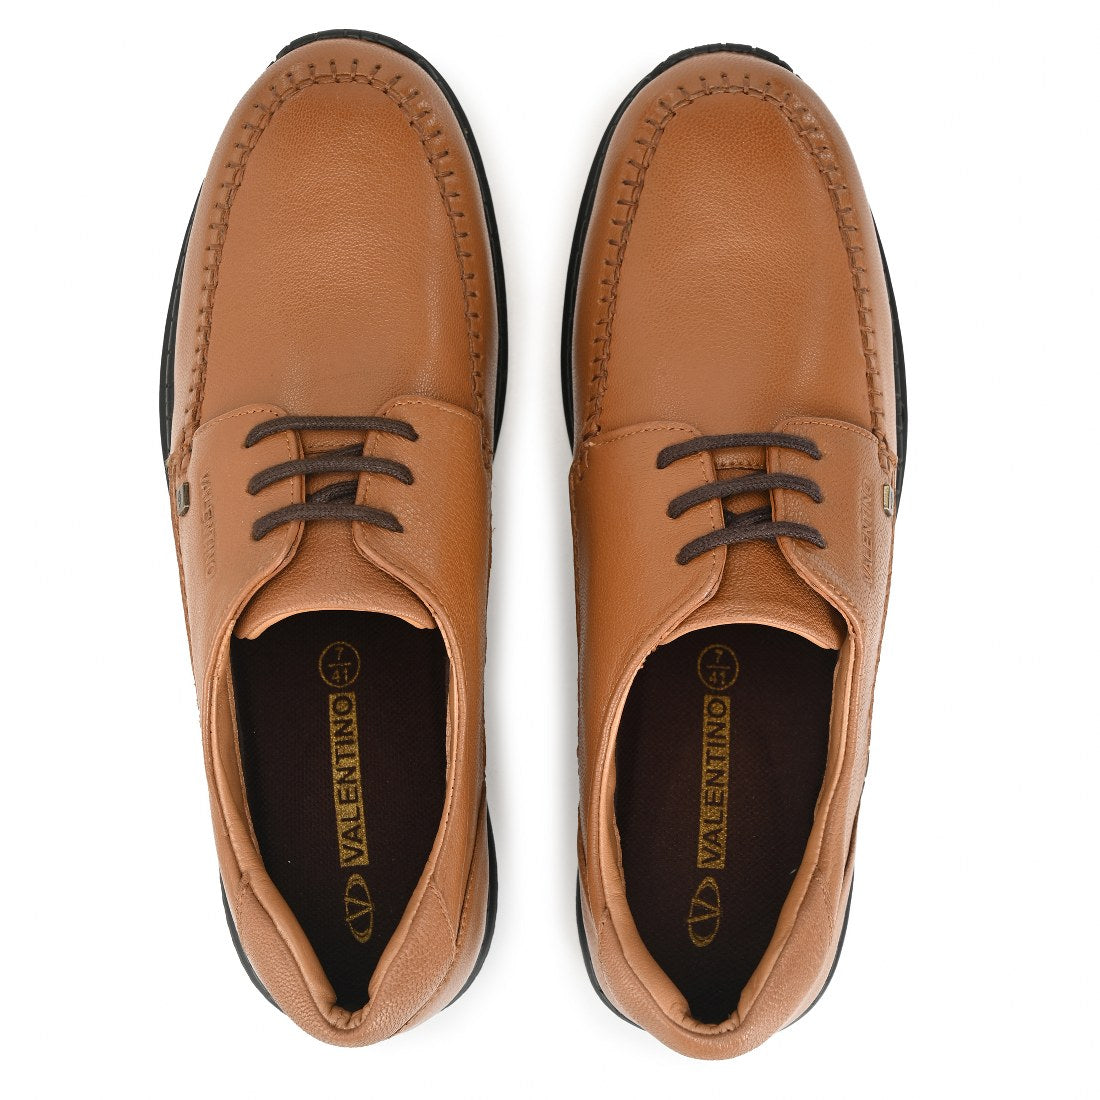 ASIAN-52 MEN LEATHER TAN CASUAL LACE UP DERBY